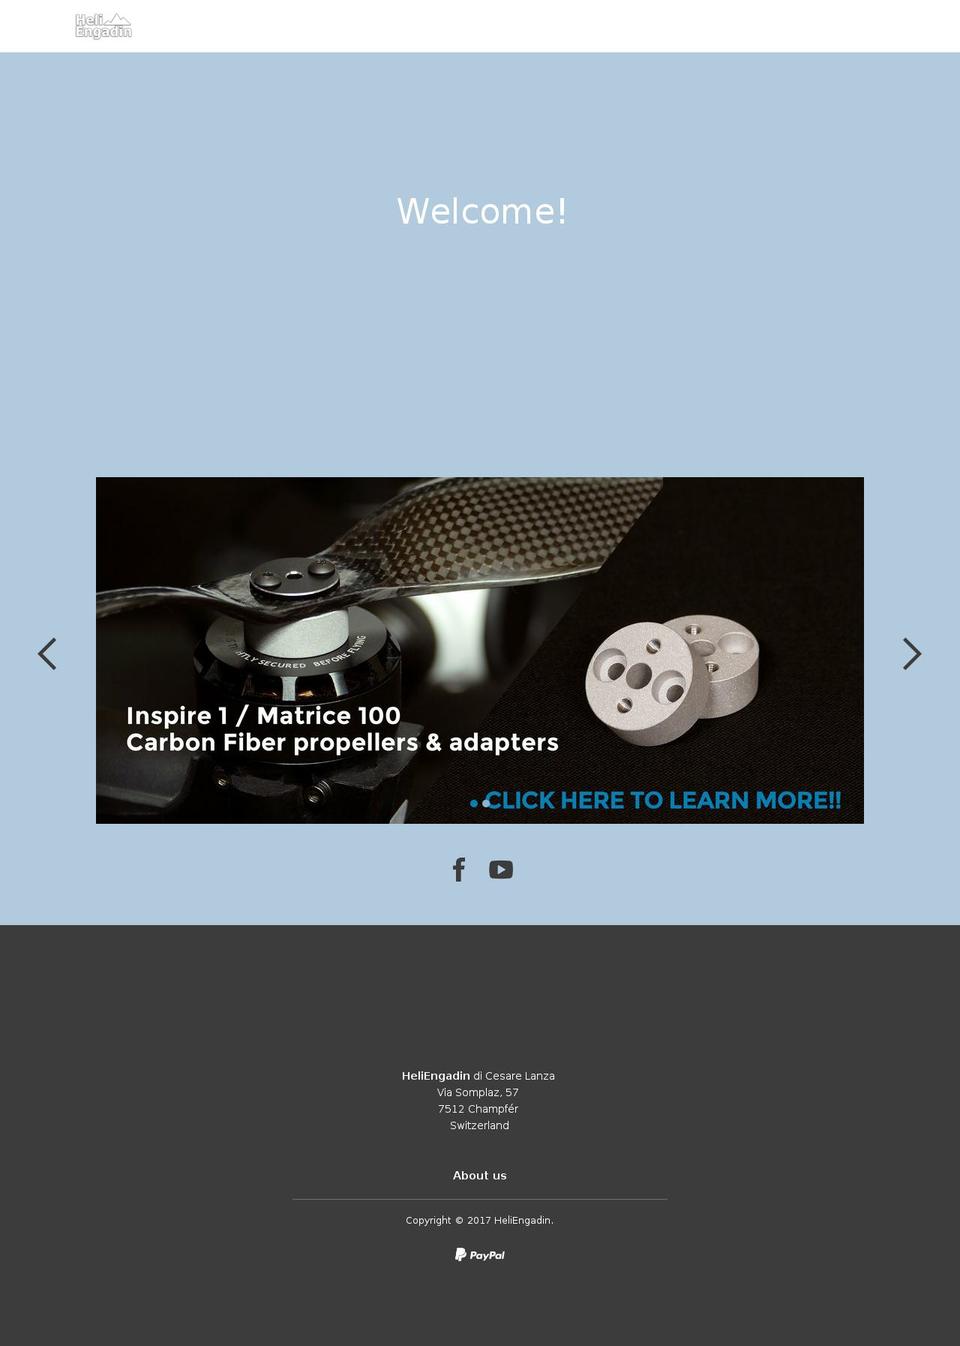 basel Shopify theme site example heliengadin.com